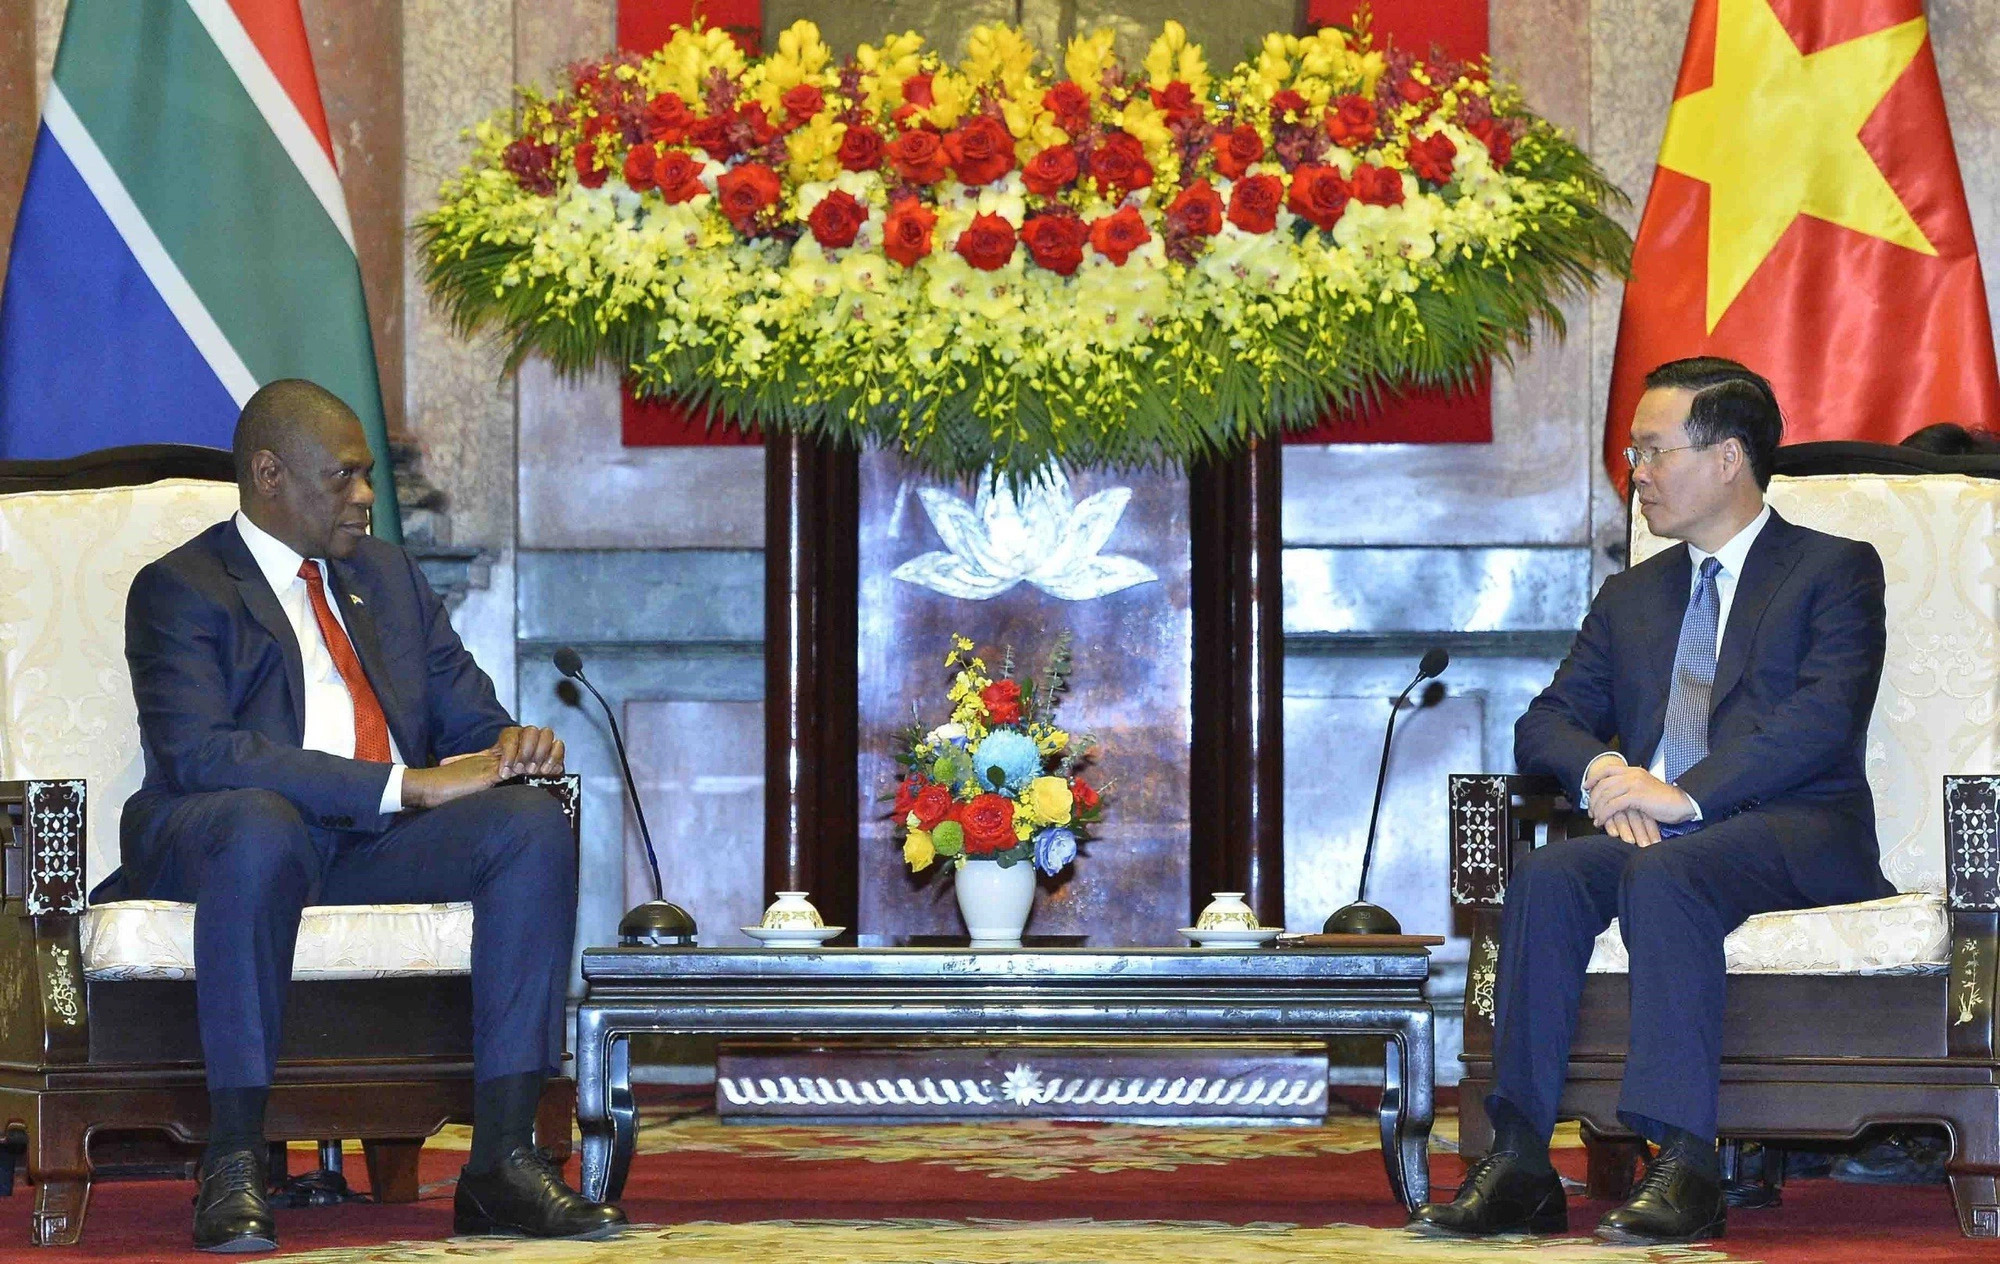 Vietnam's State President Vo Van Thuong extended his invitation to South Africa’s President Cyril Ramaphosa to visit Vietnam at a proper time. Photo: Vietnam News Agency